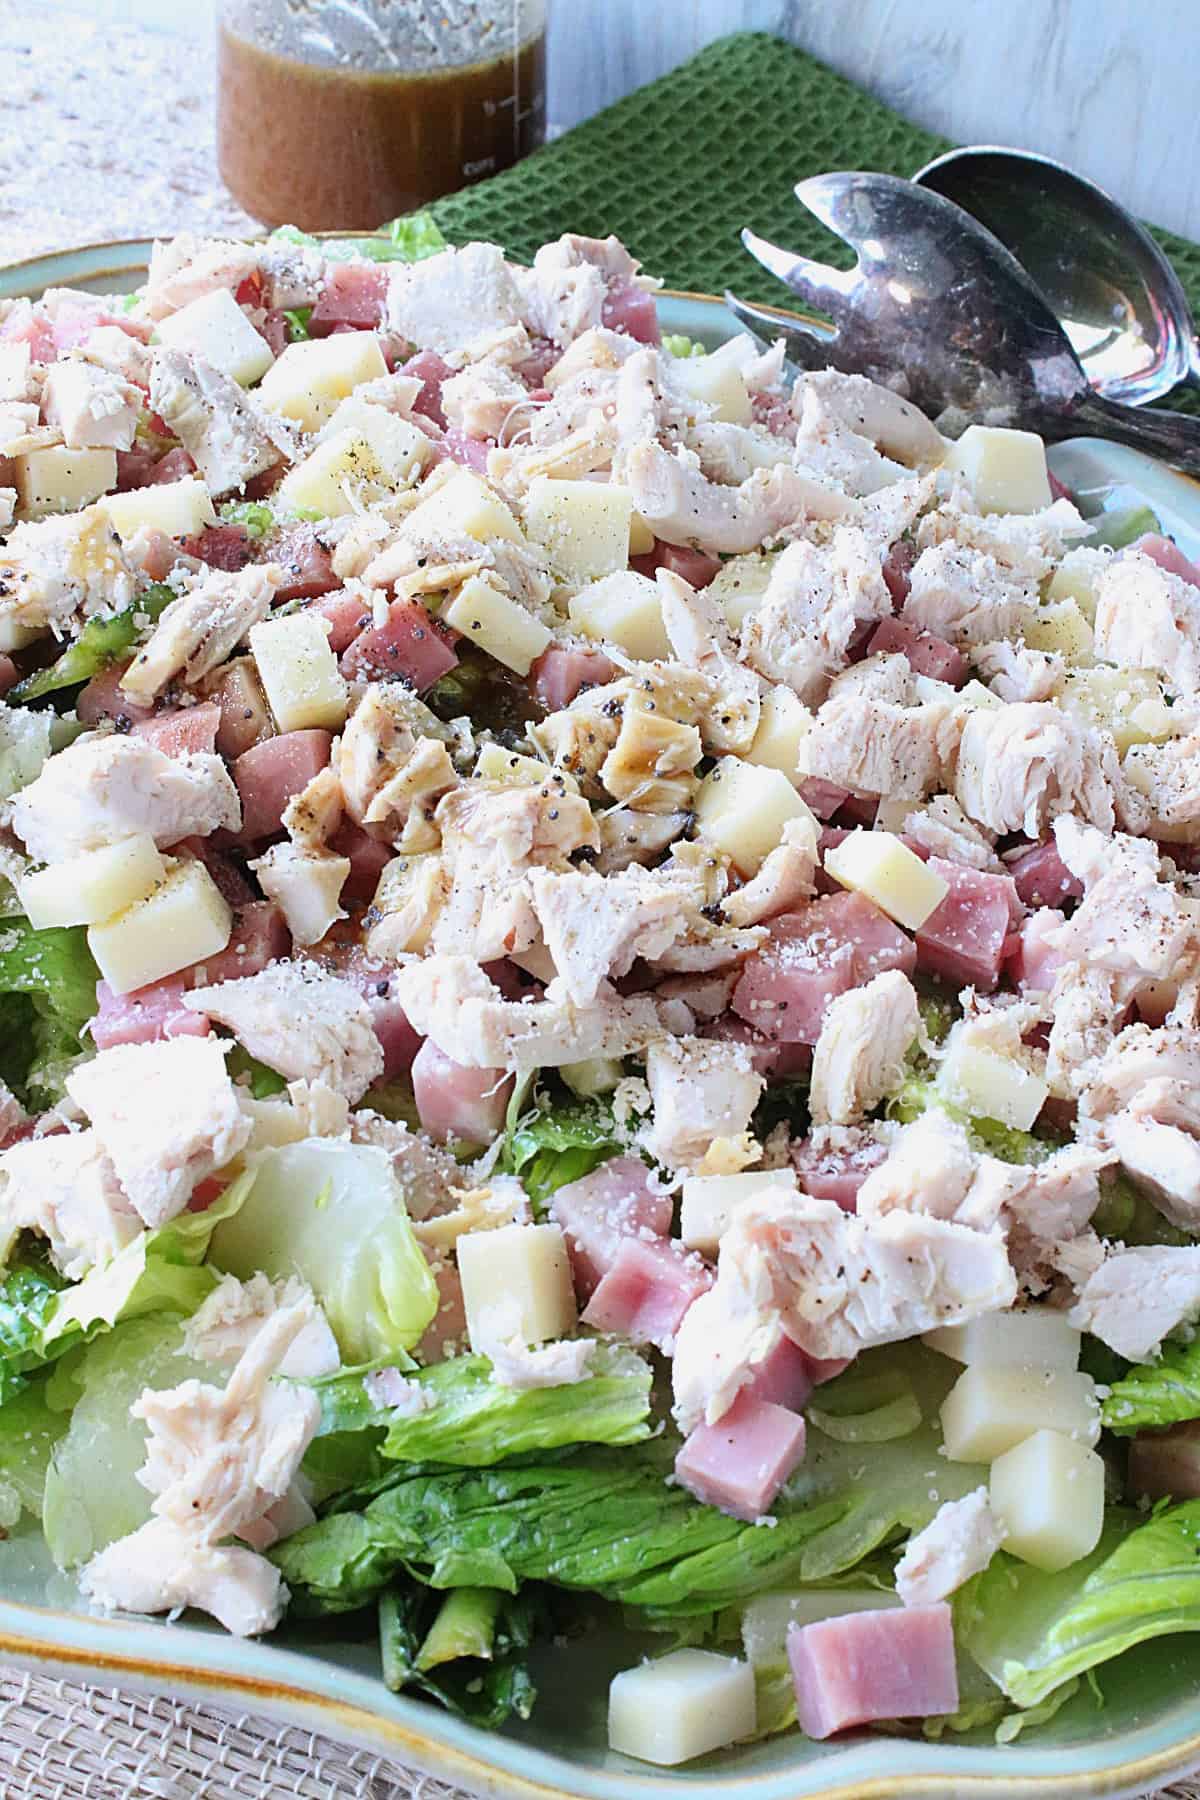 A delicious looking Chicken Cordon Bleu Salad with ham, chicken, and Swiss cheese.